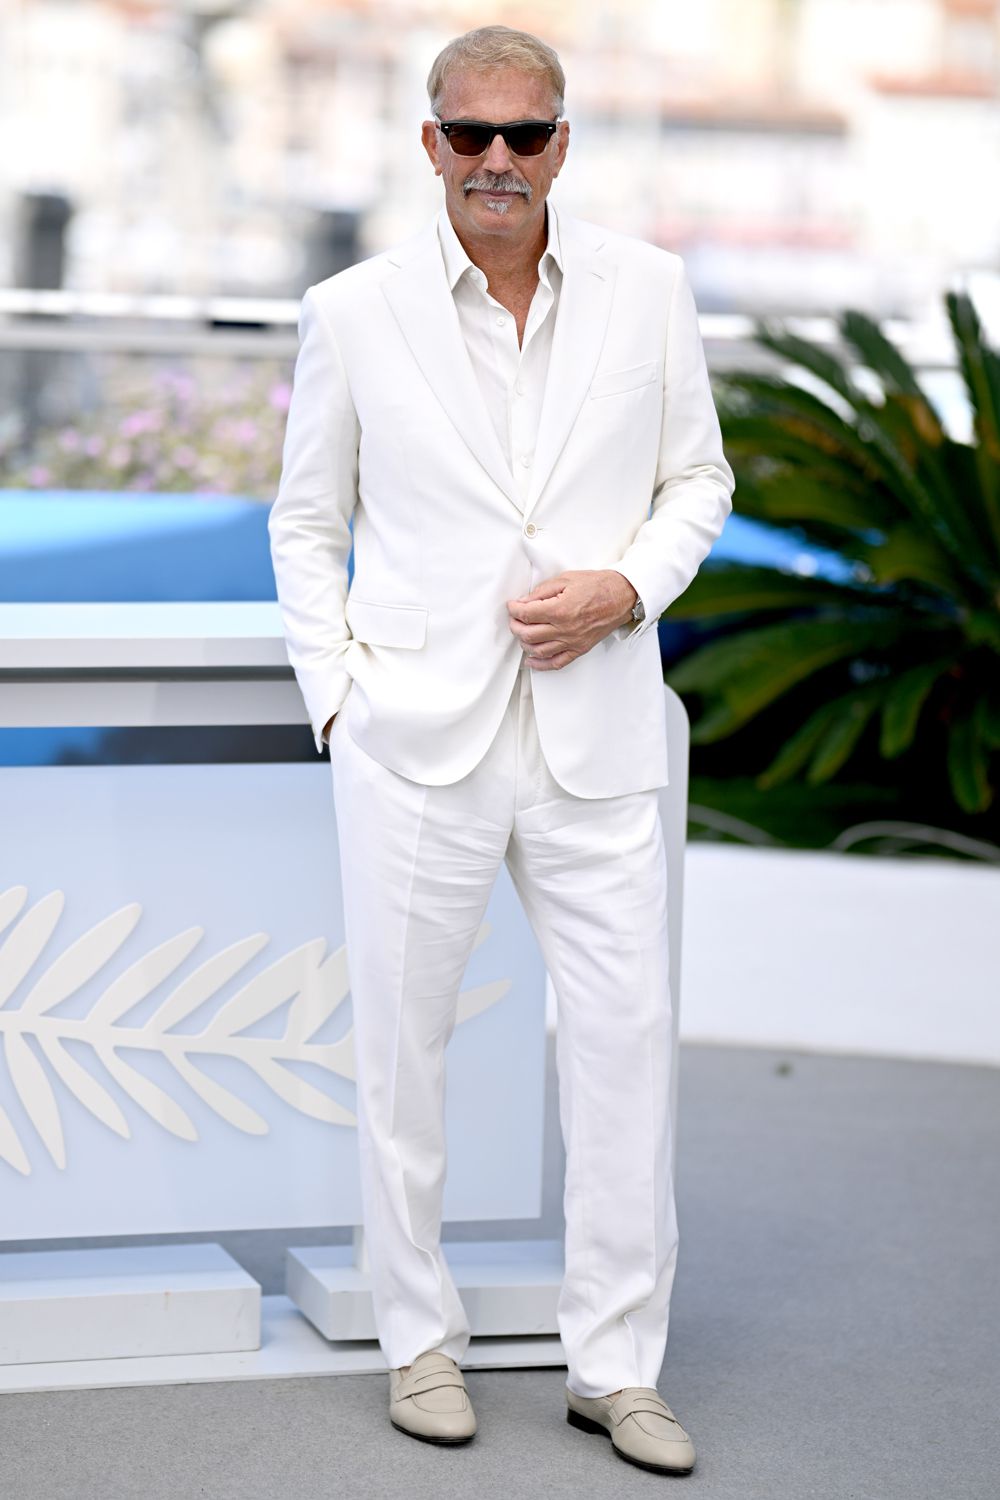 Kevin Costner attends the "Horizon: An American Saga" Photocall at the 77th annual Cannes Film Festival at Palais 